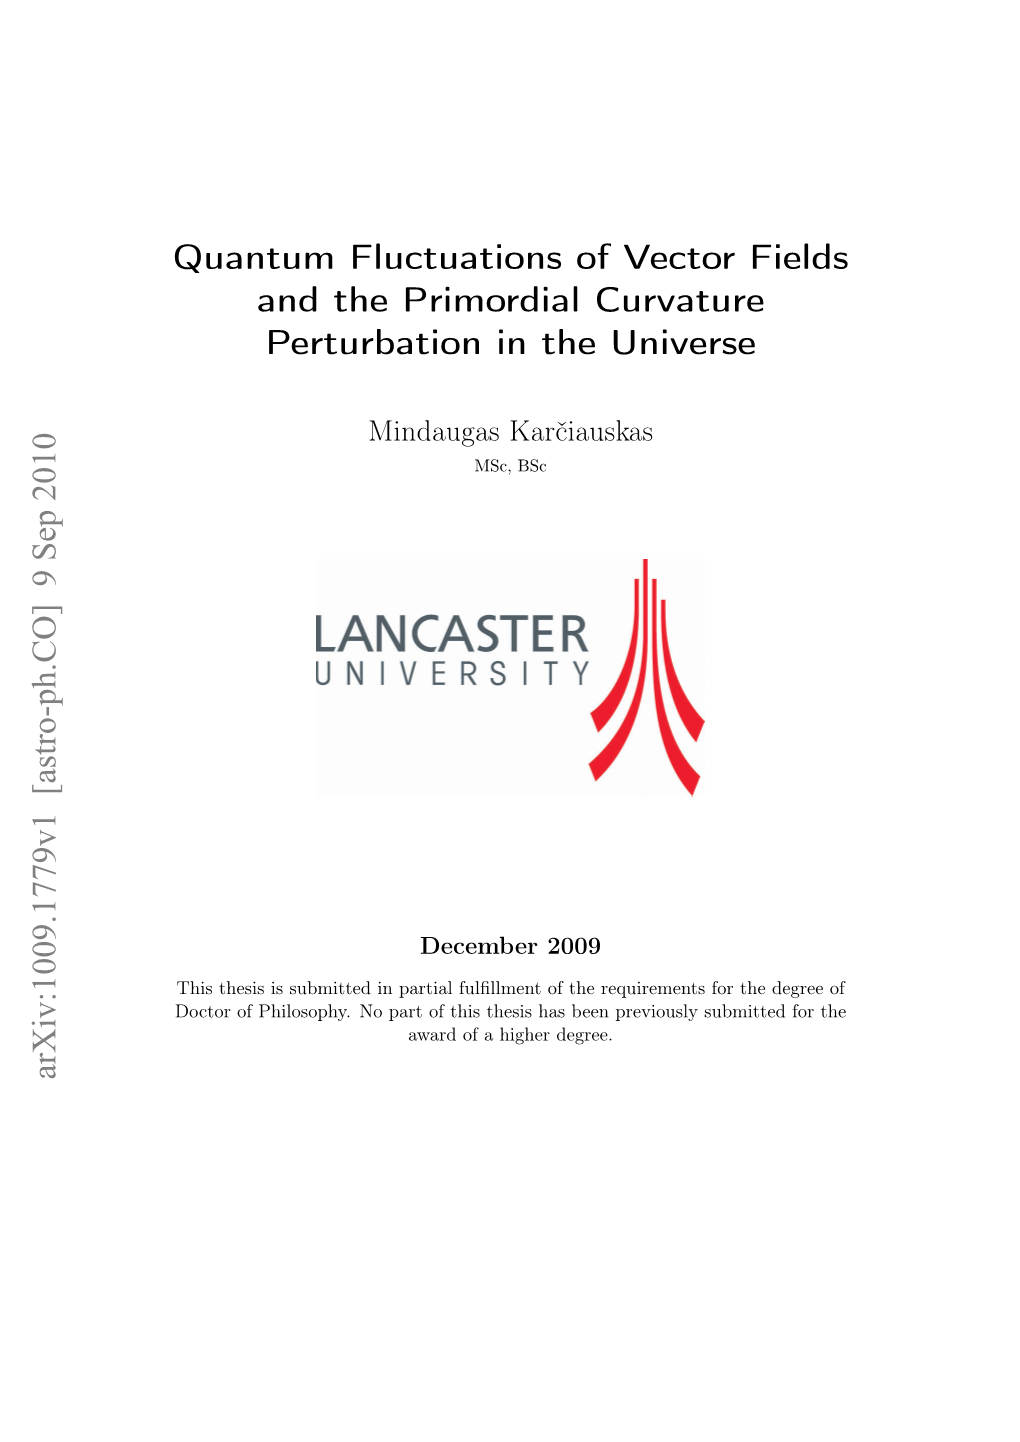 Quantum Fluctuations of Vector Fields and the Primordial Curvature Perturbation in the Universe